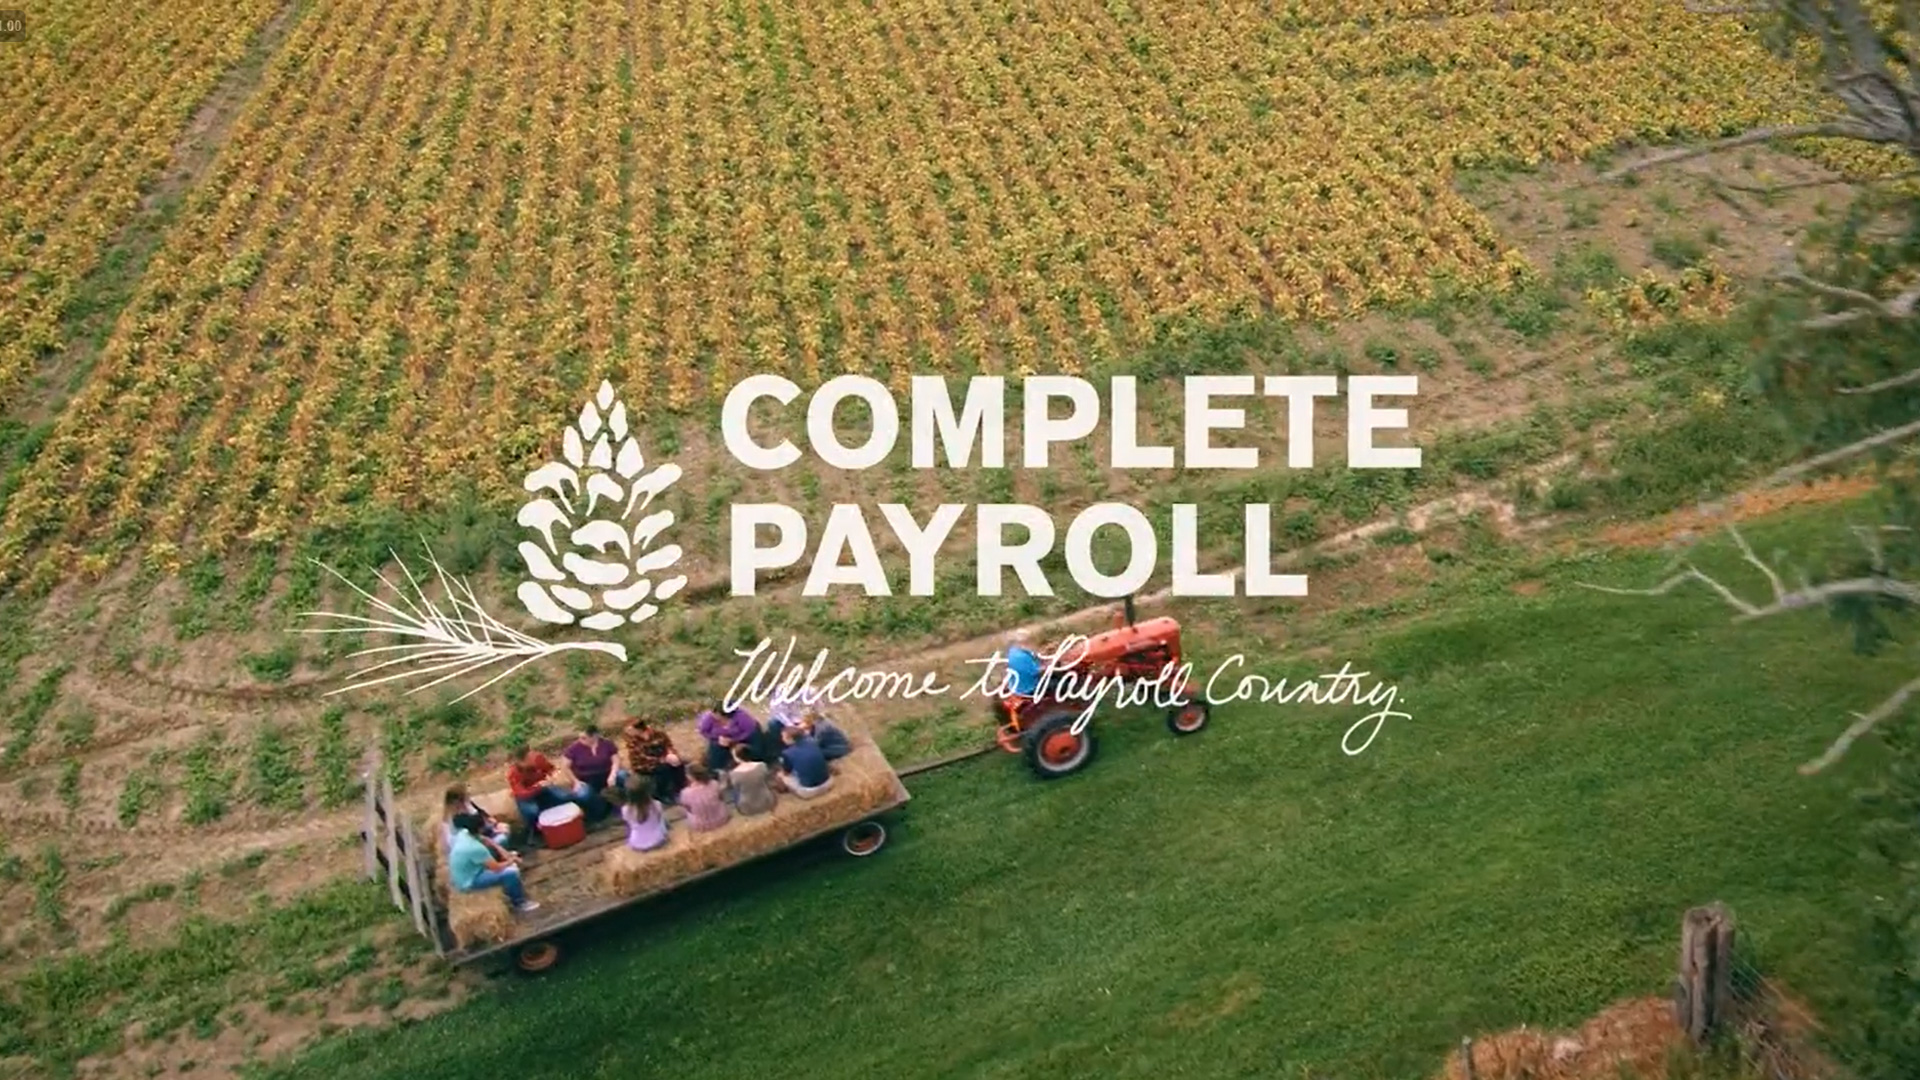 Welcome to Payroll Country